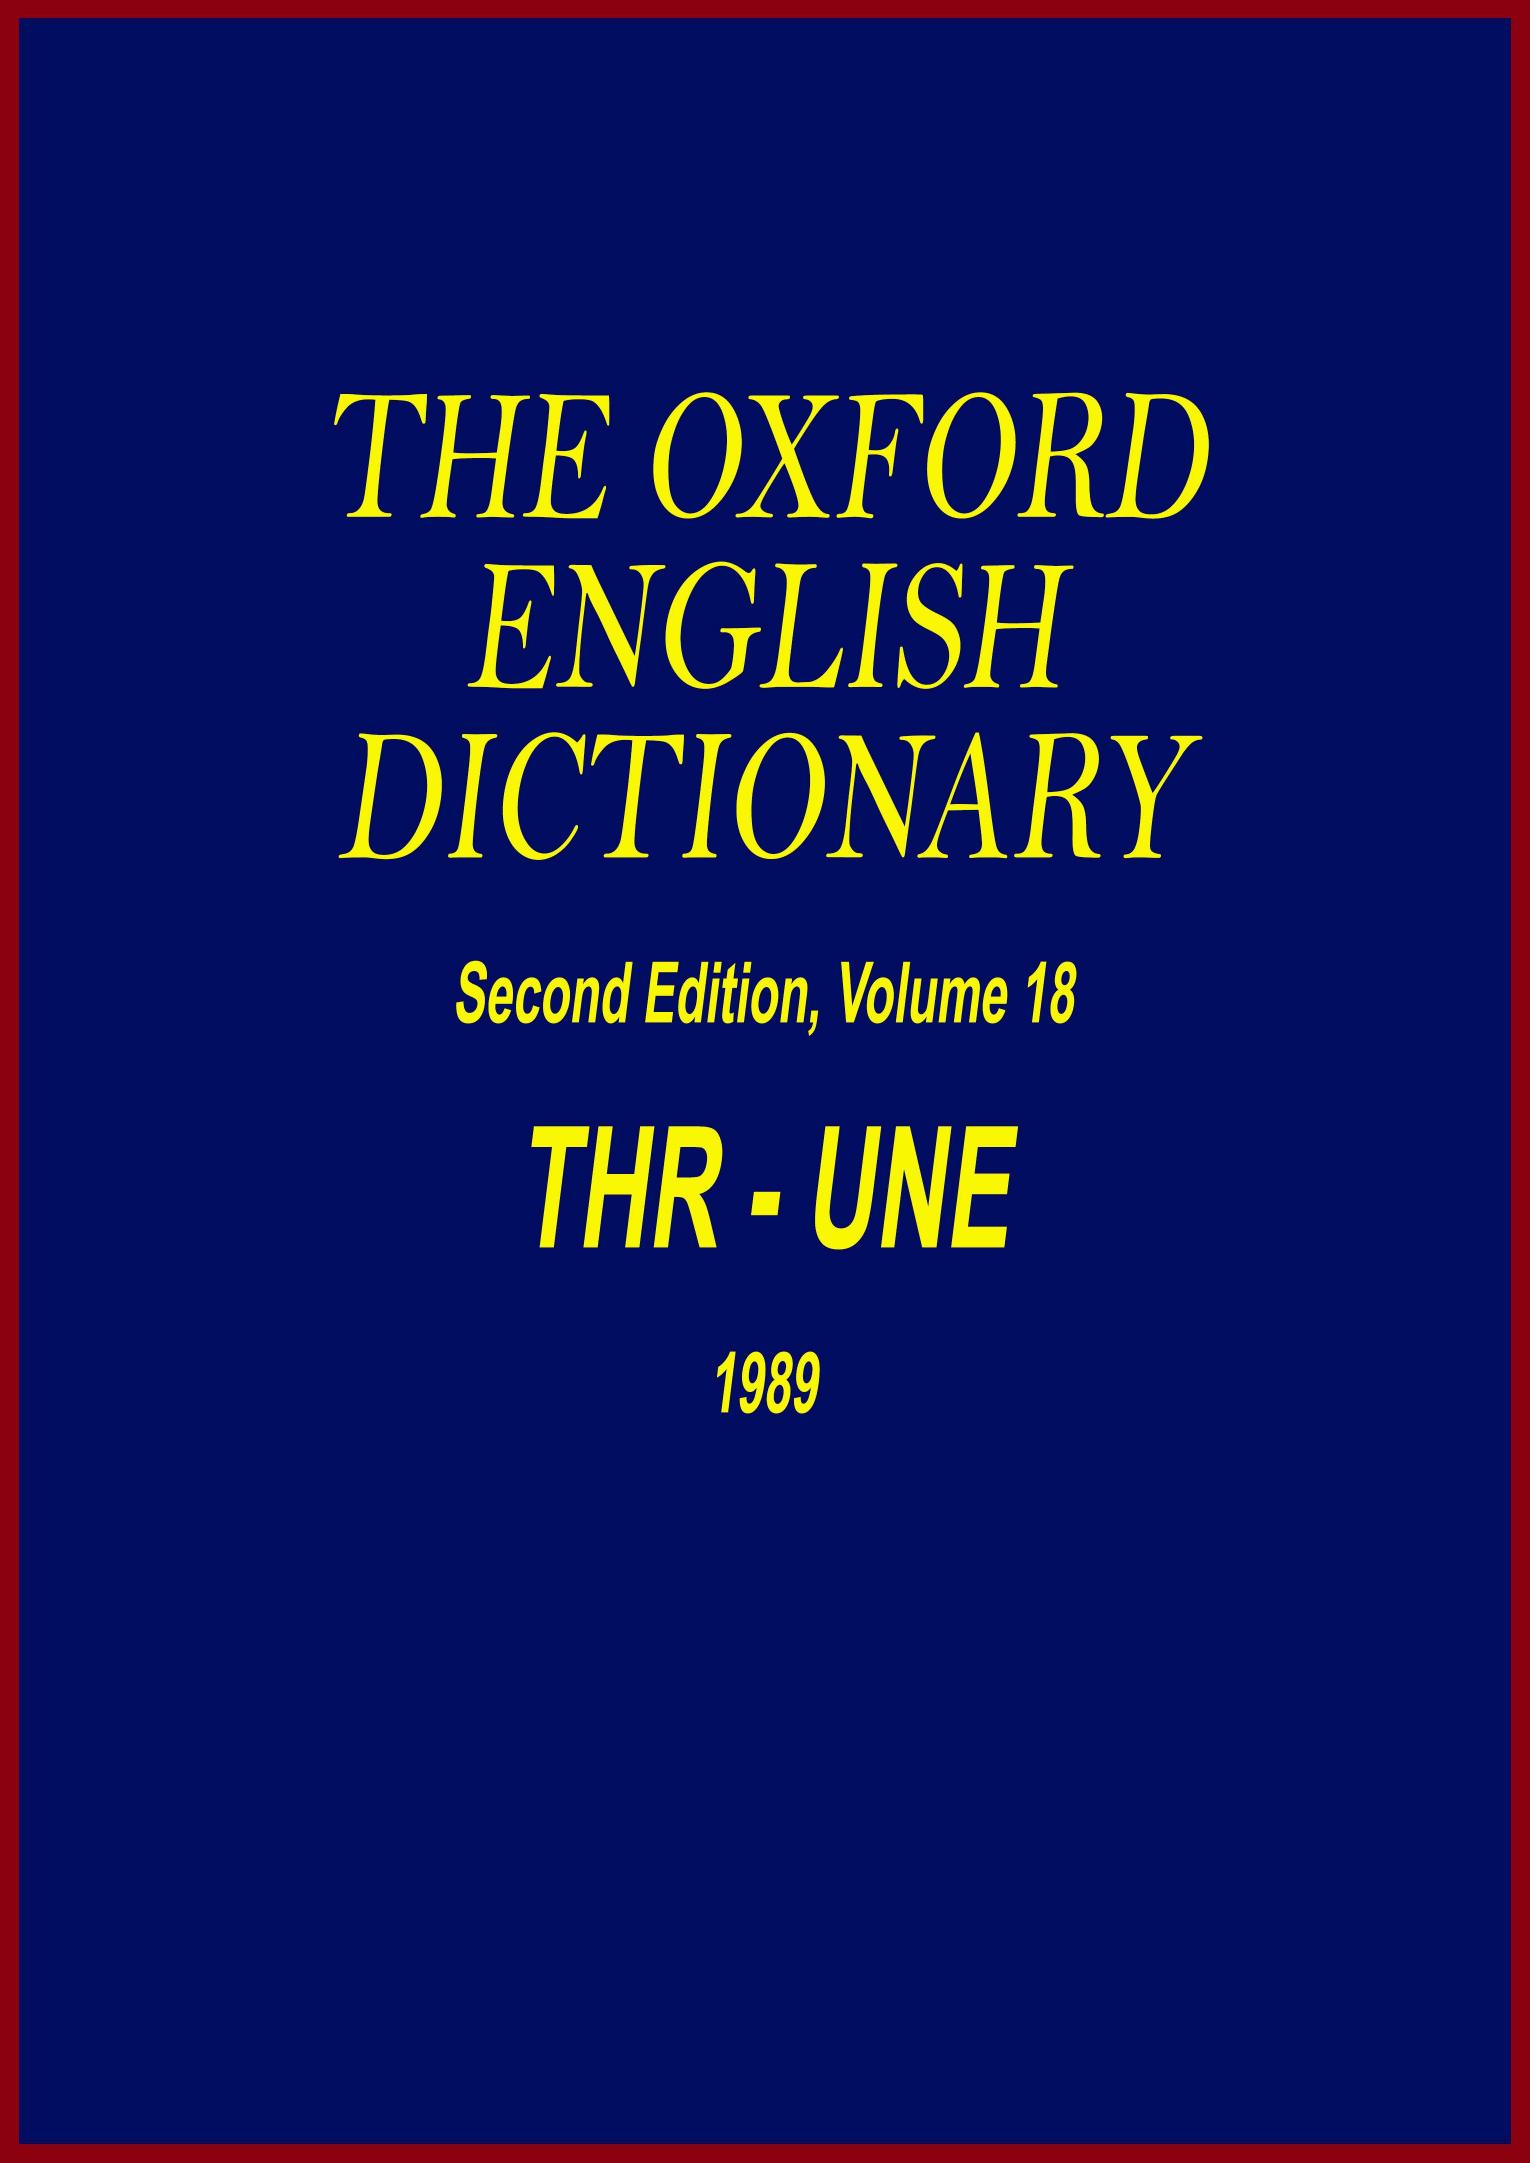 The Oxford English Dictionary - THR-UNE